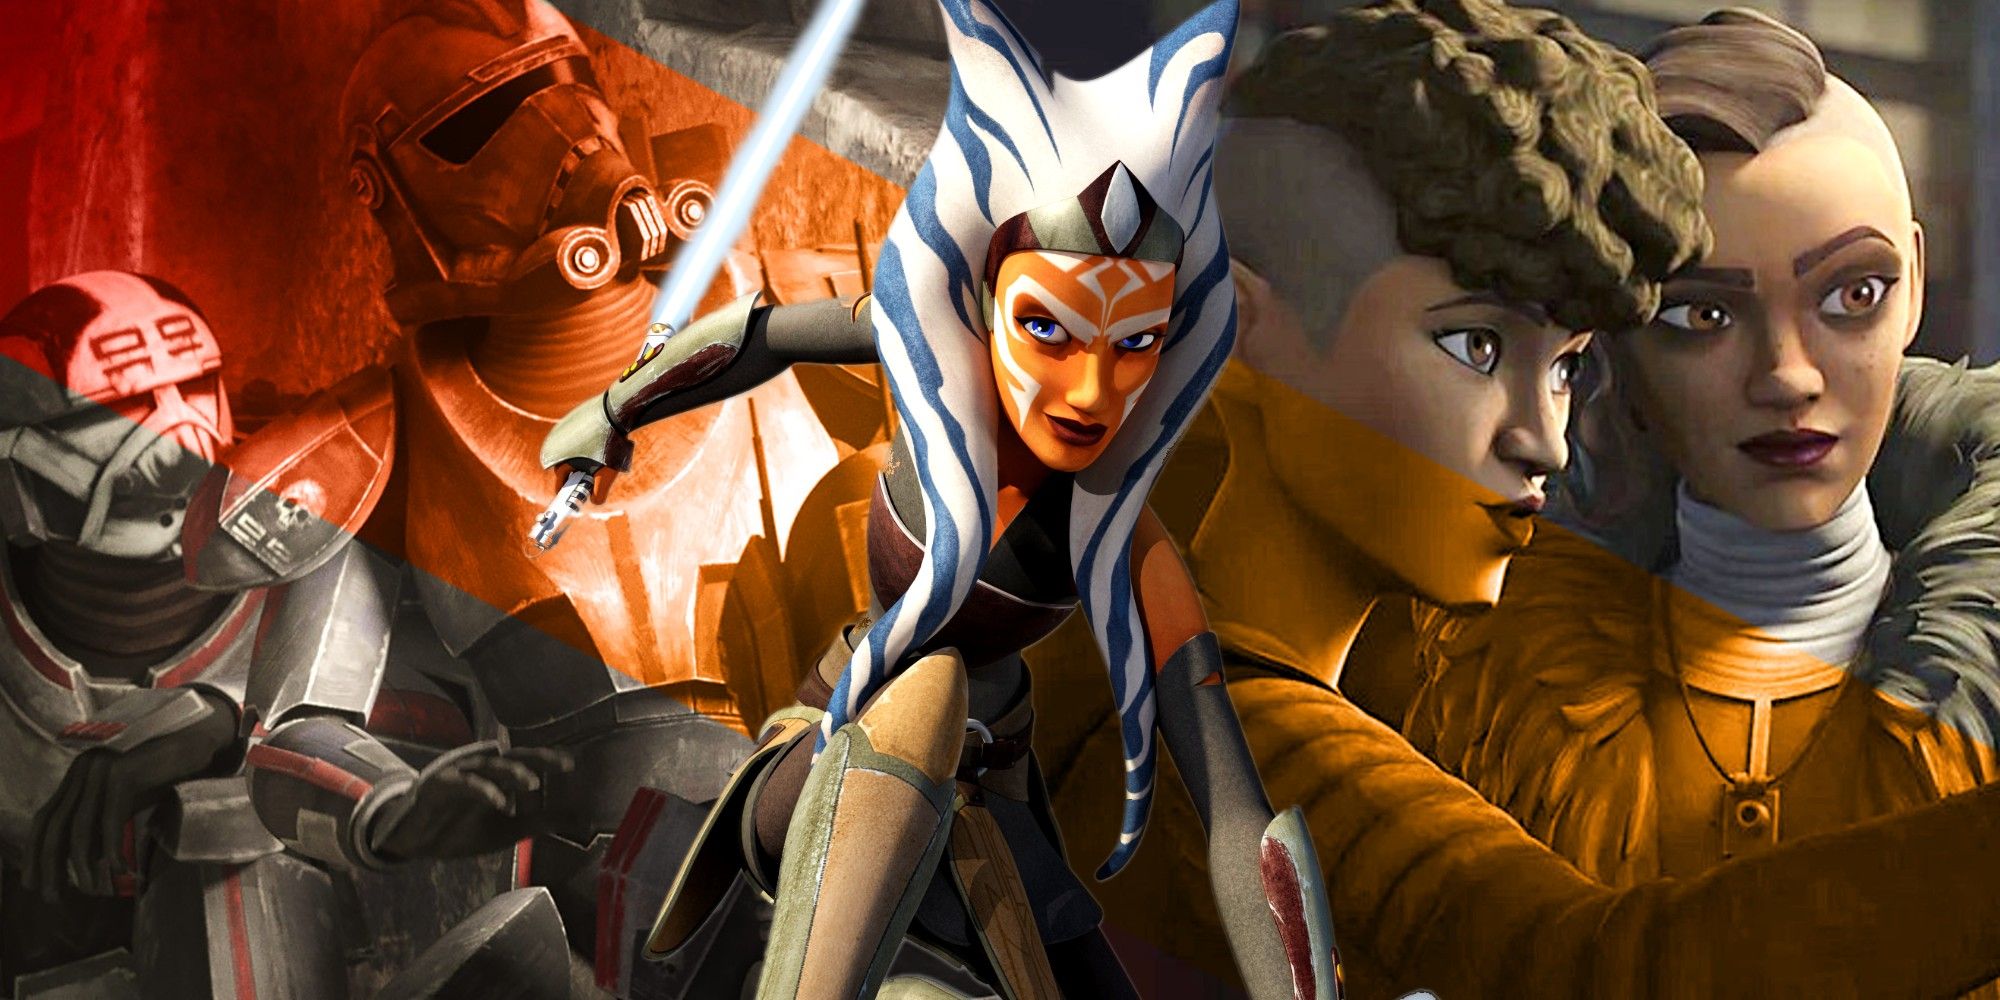 The Bad Batch Episode 6 References Ahsoka Tano Will She Appear